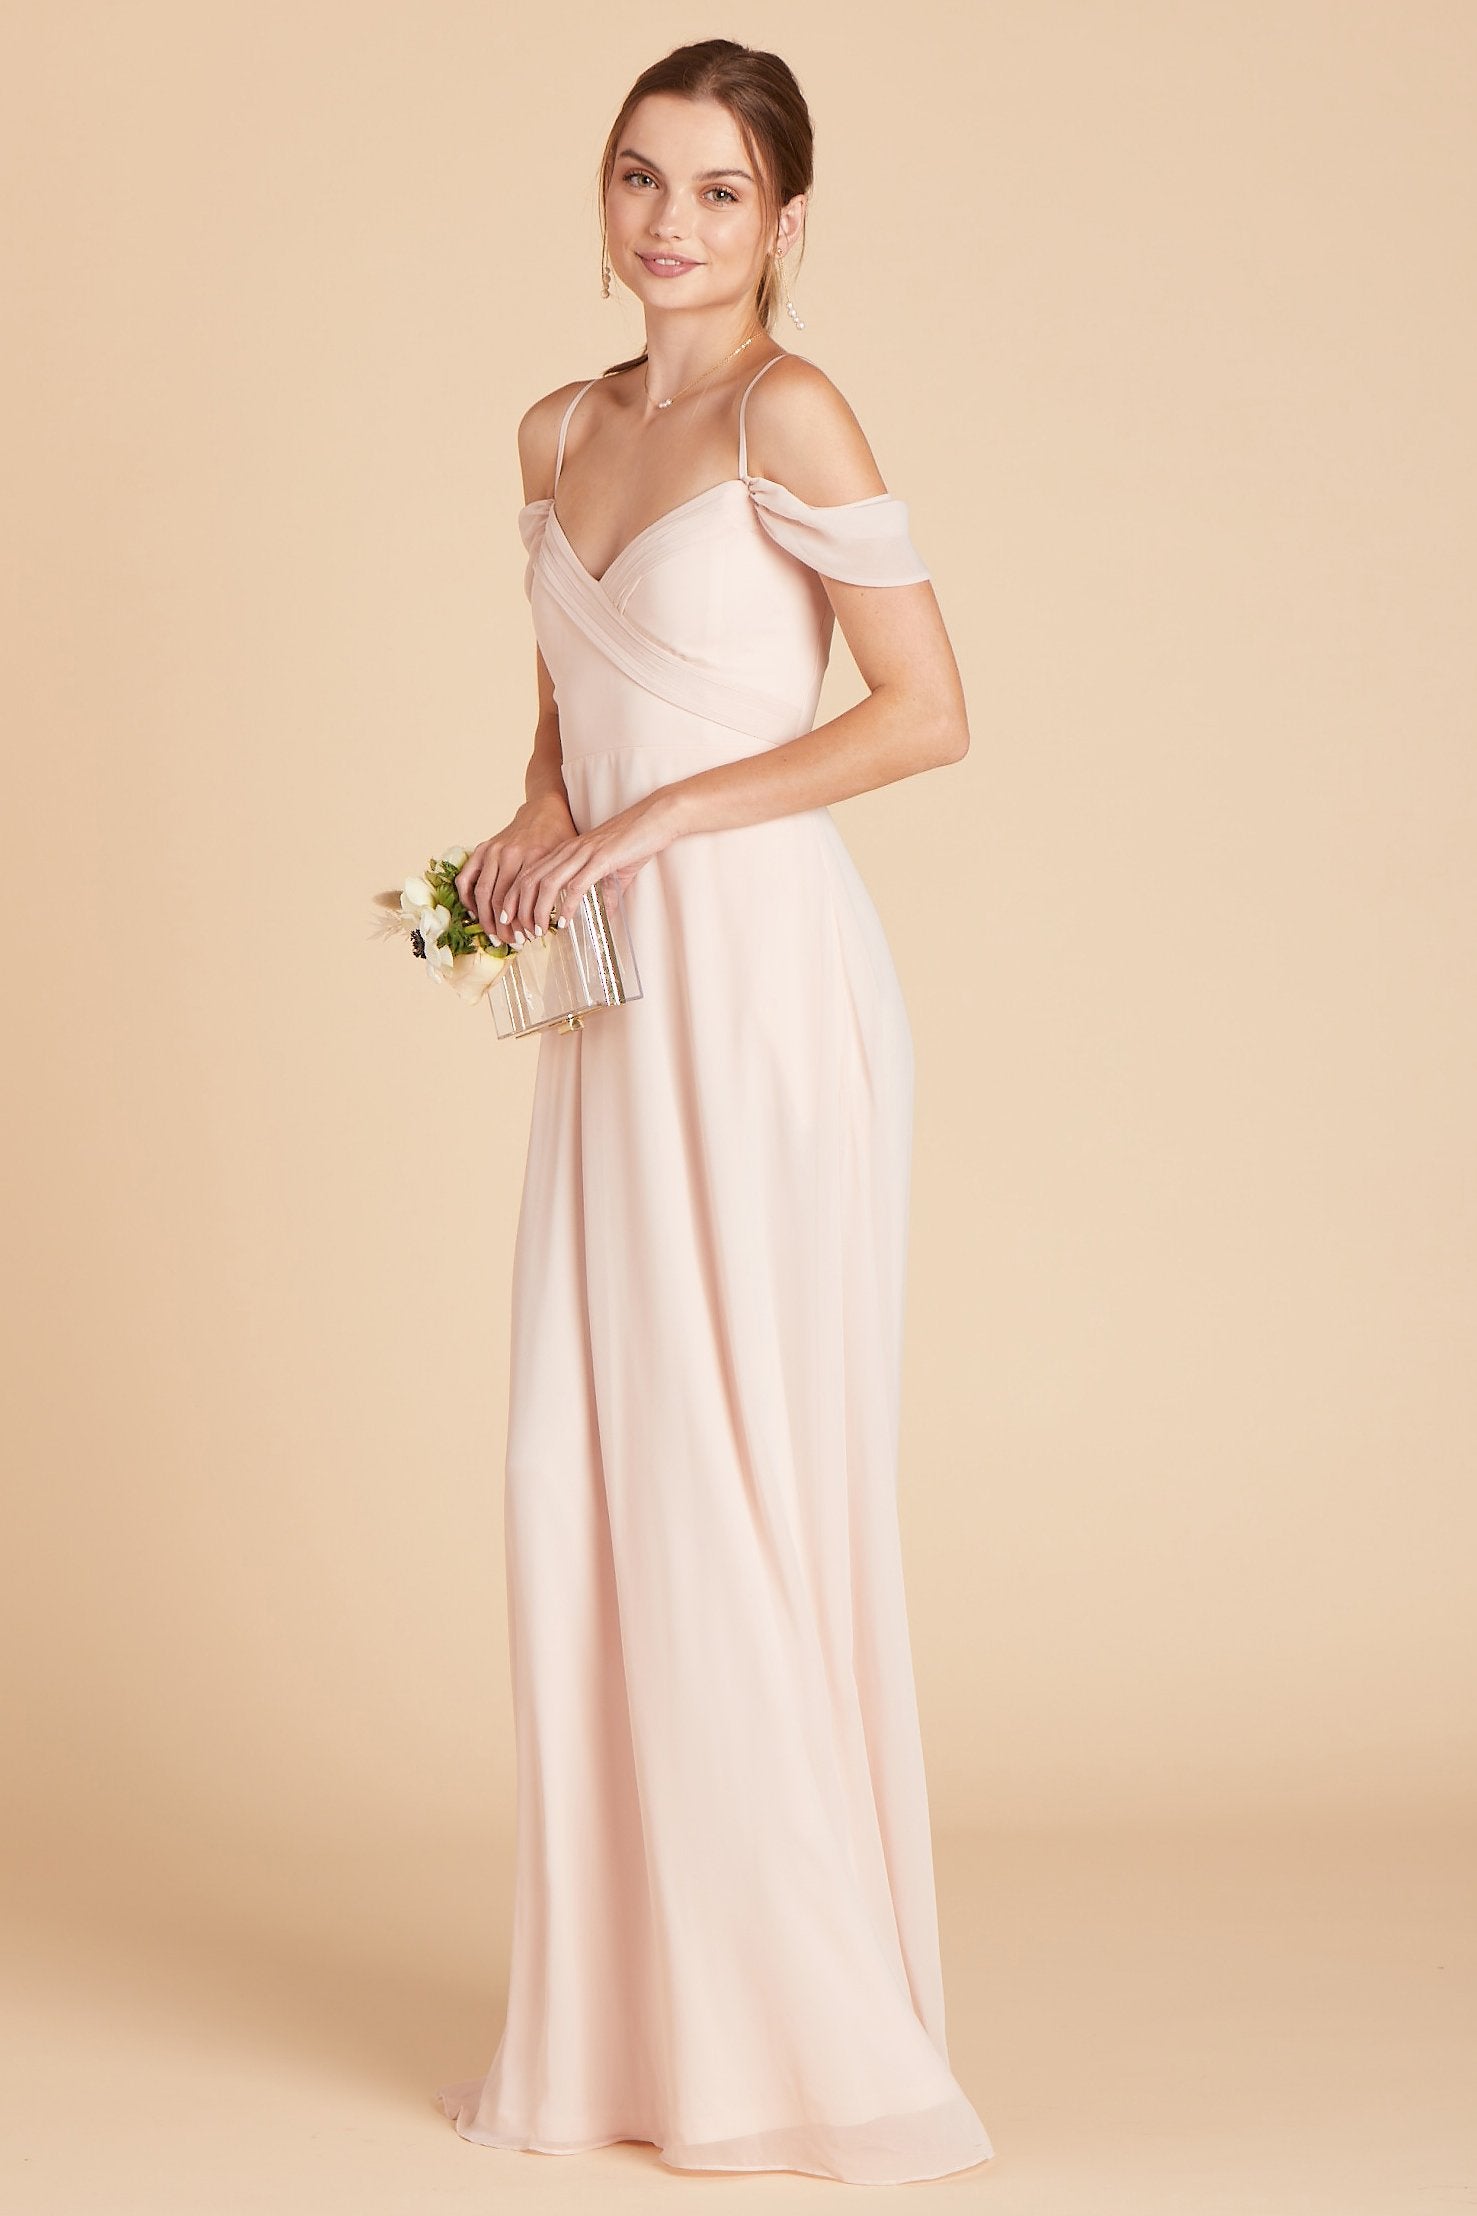 Spence convertible bridesmaid dress in pale blush chiffon by Birdy Grey, side view